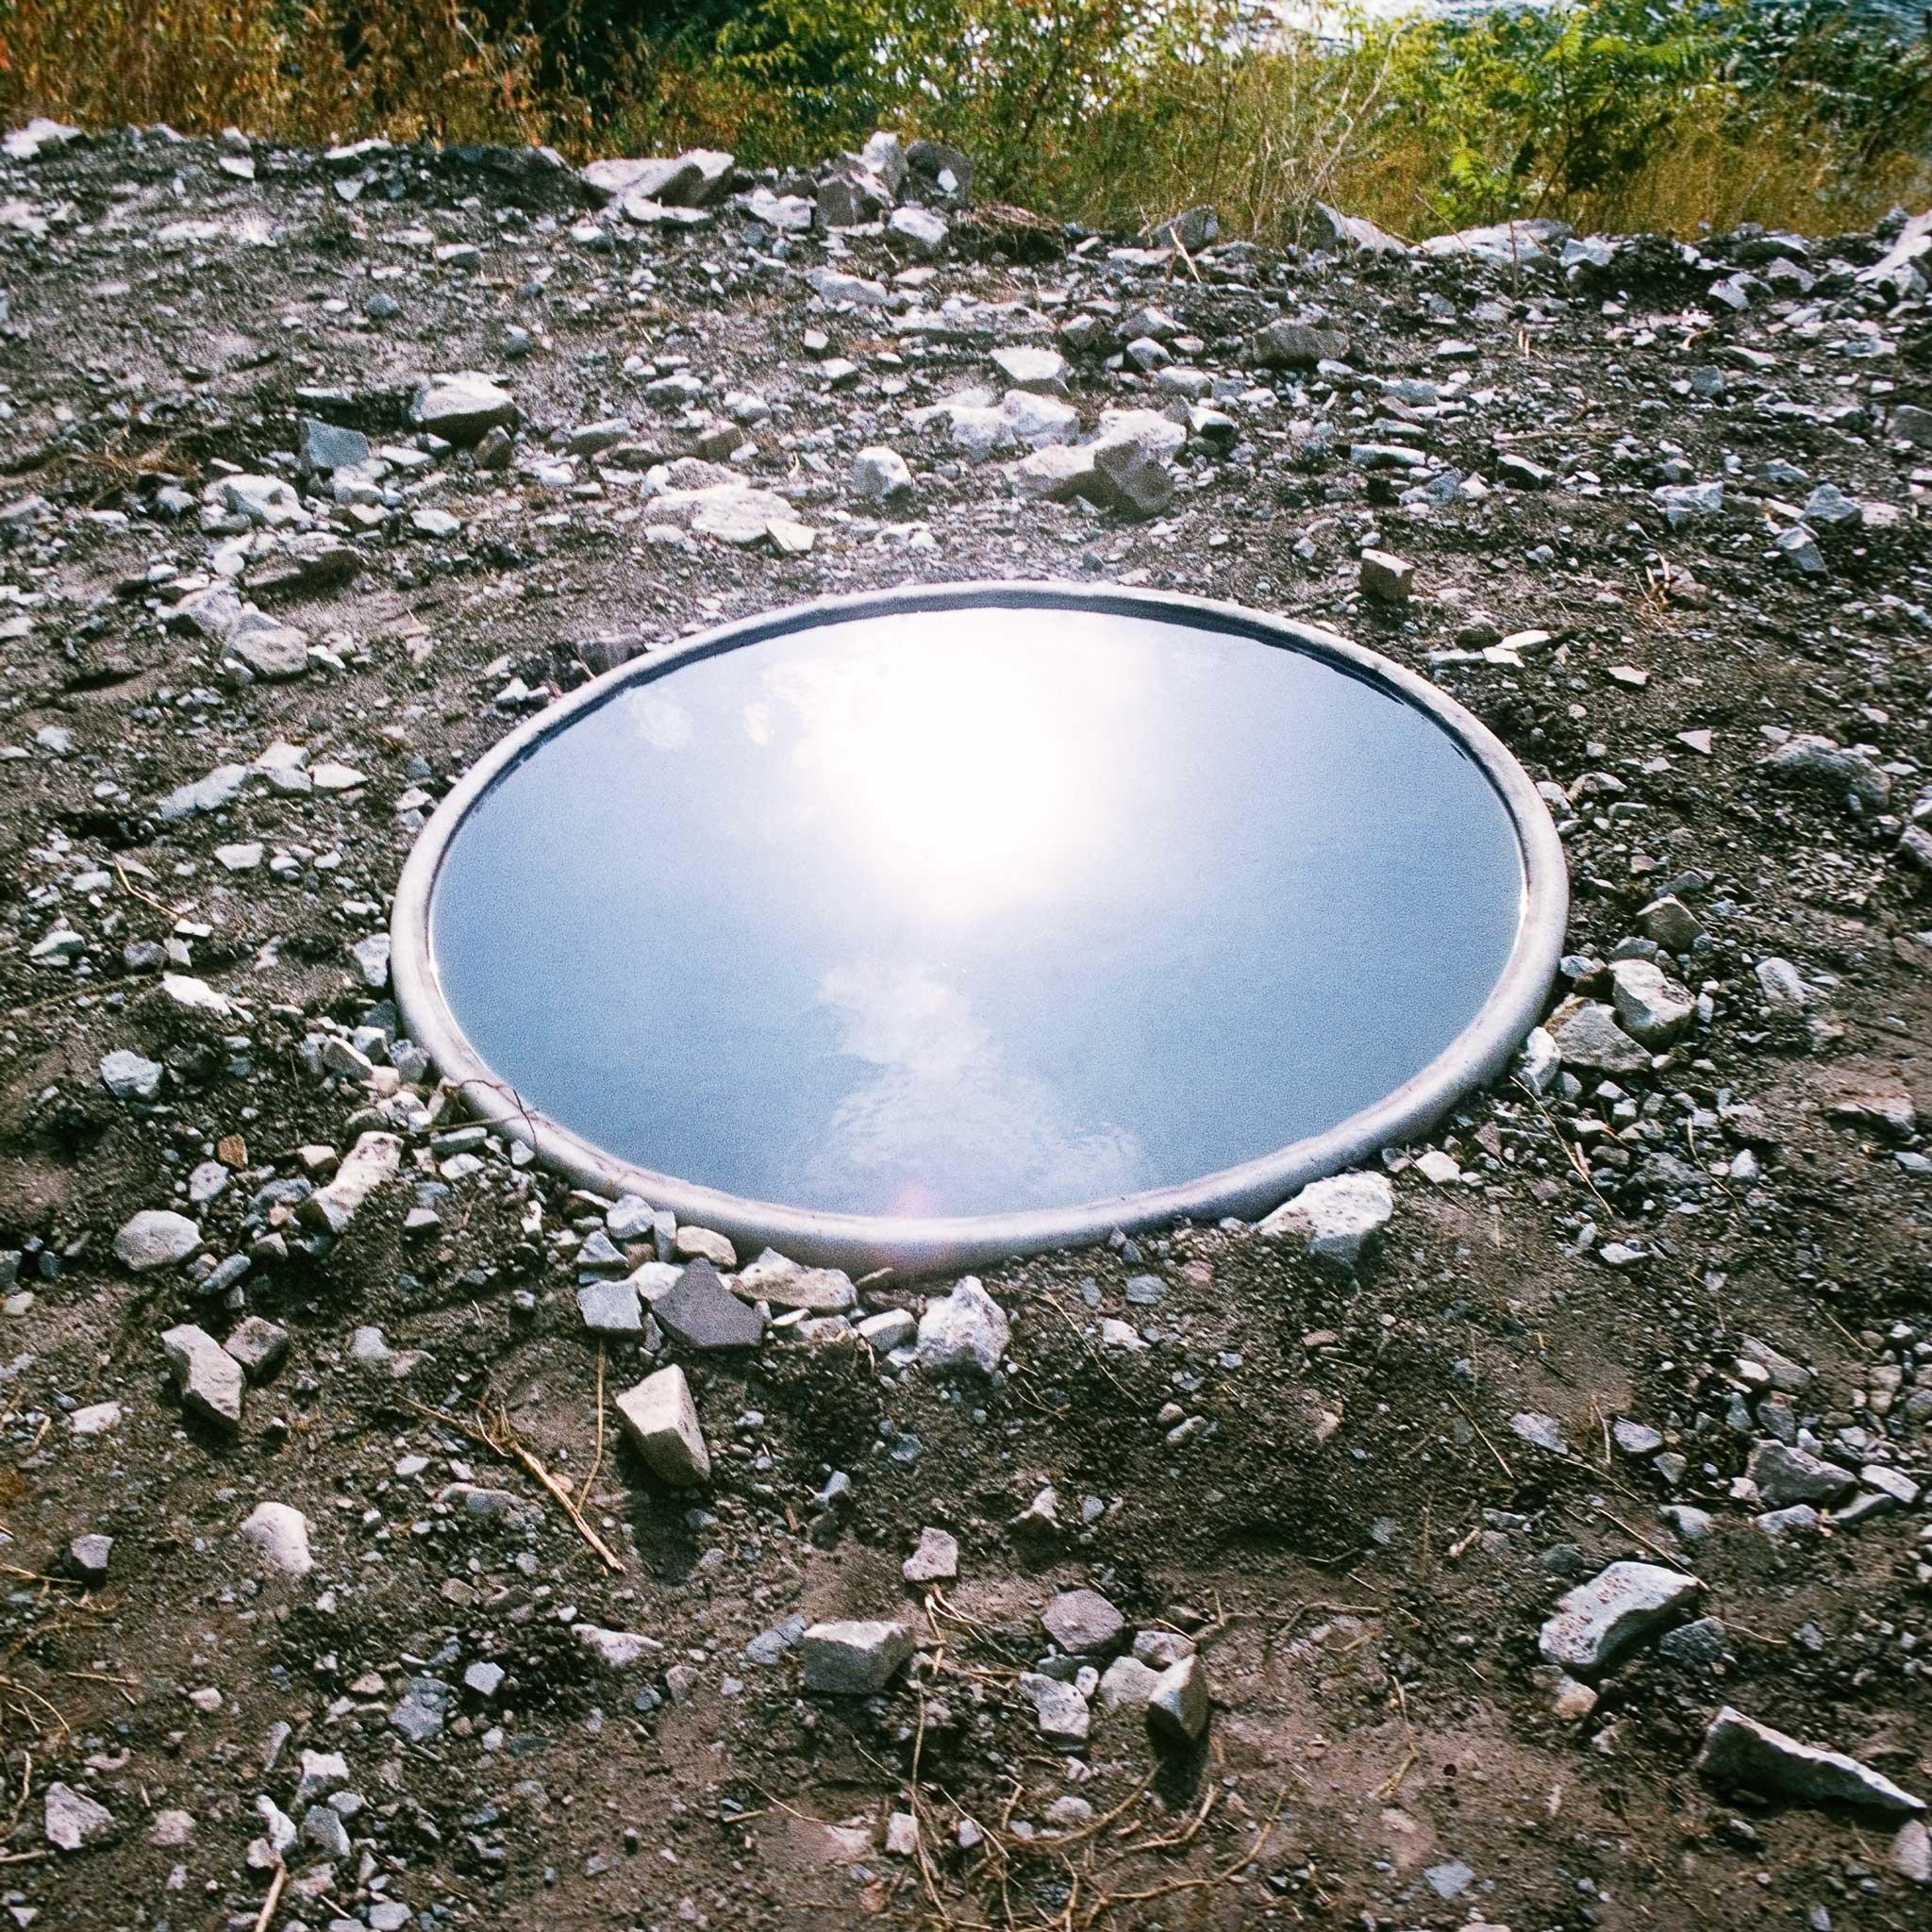 A circular pool of water reflecting a blue sky.